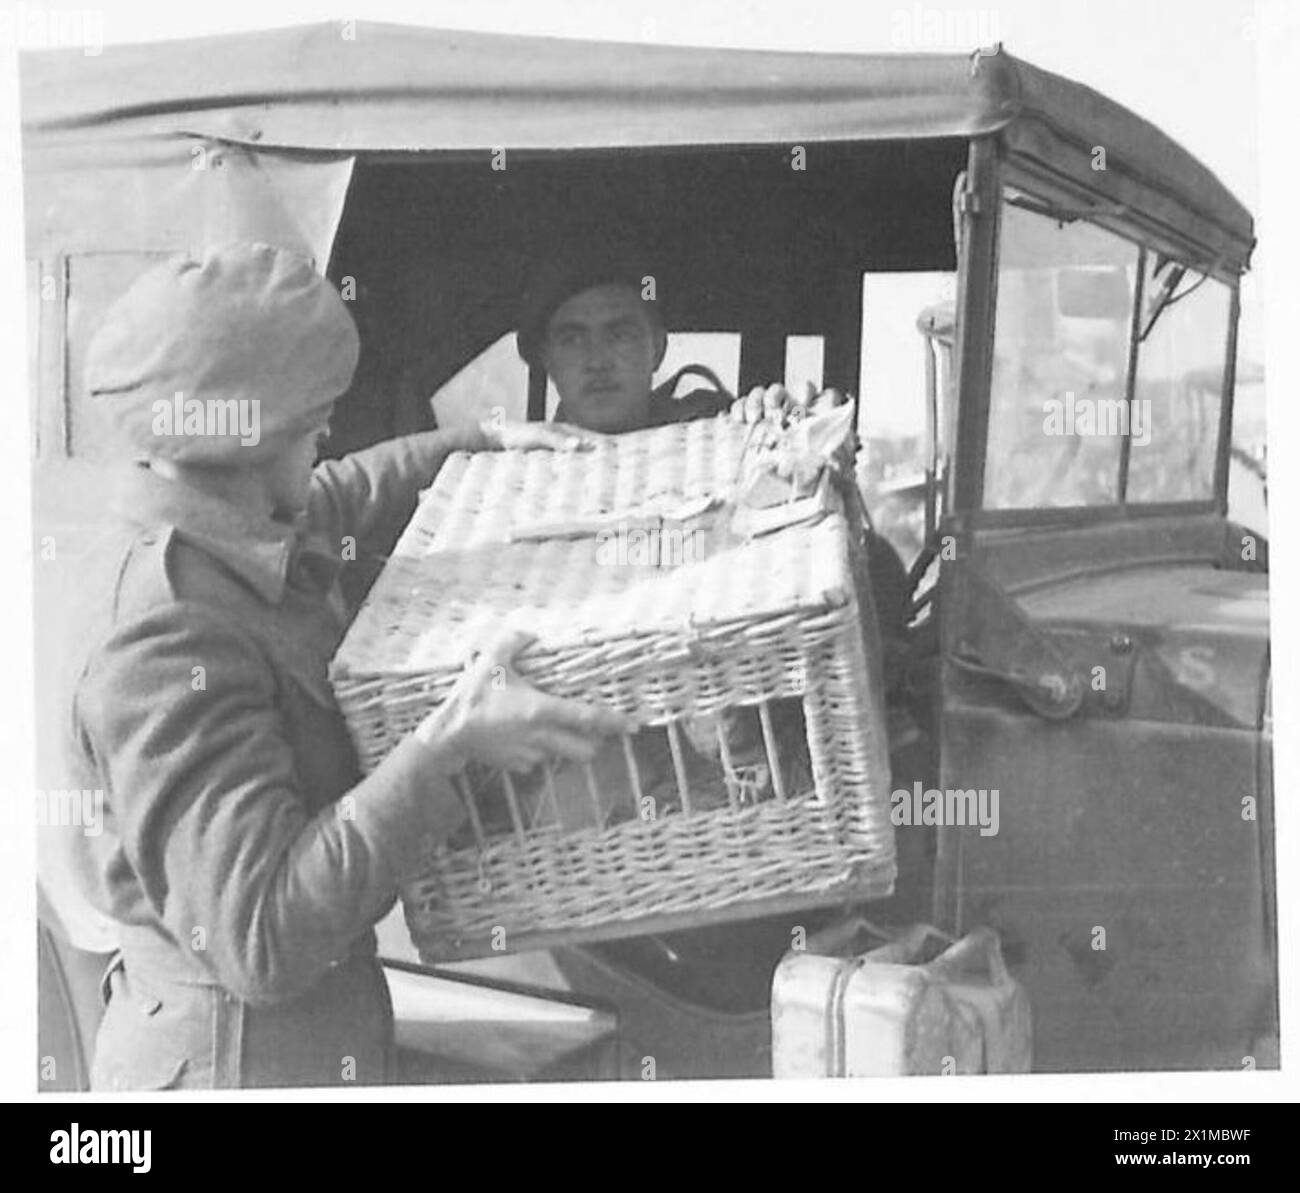 8TH ARMY CARRIER PIGEON SERVICE - A basket of pigeons is loaded into a truck for the forward area. Rations and water trough, to sustain the birds during the period away from the home loft are attached, British Army Stock Photo